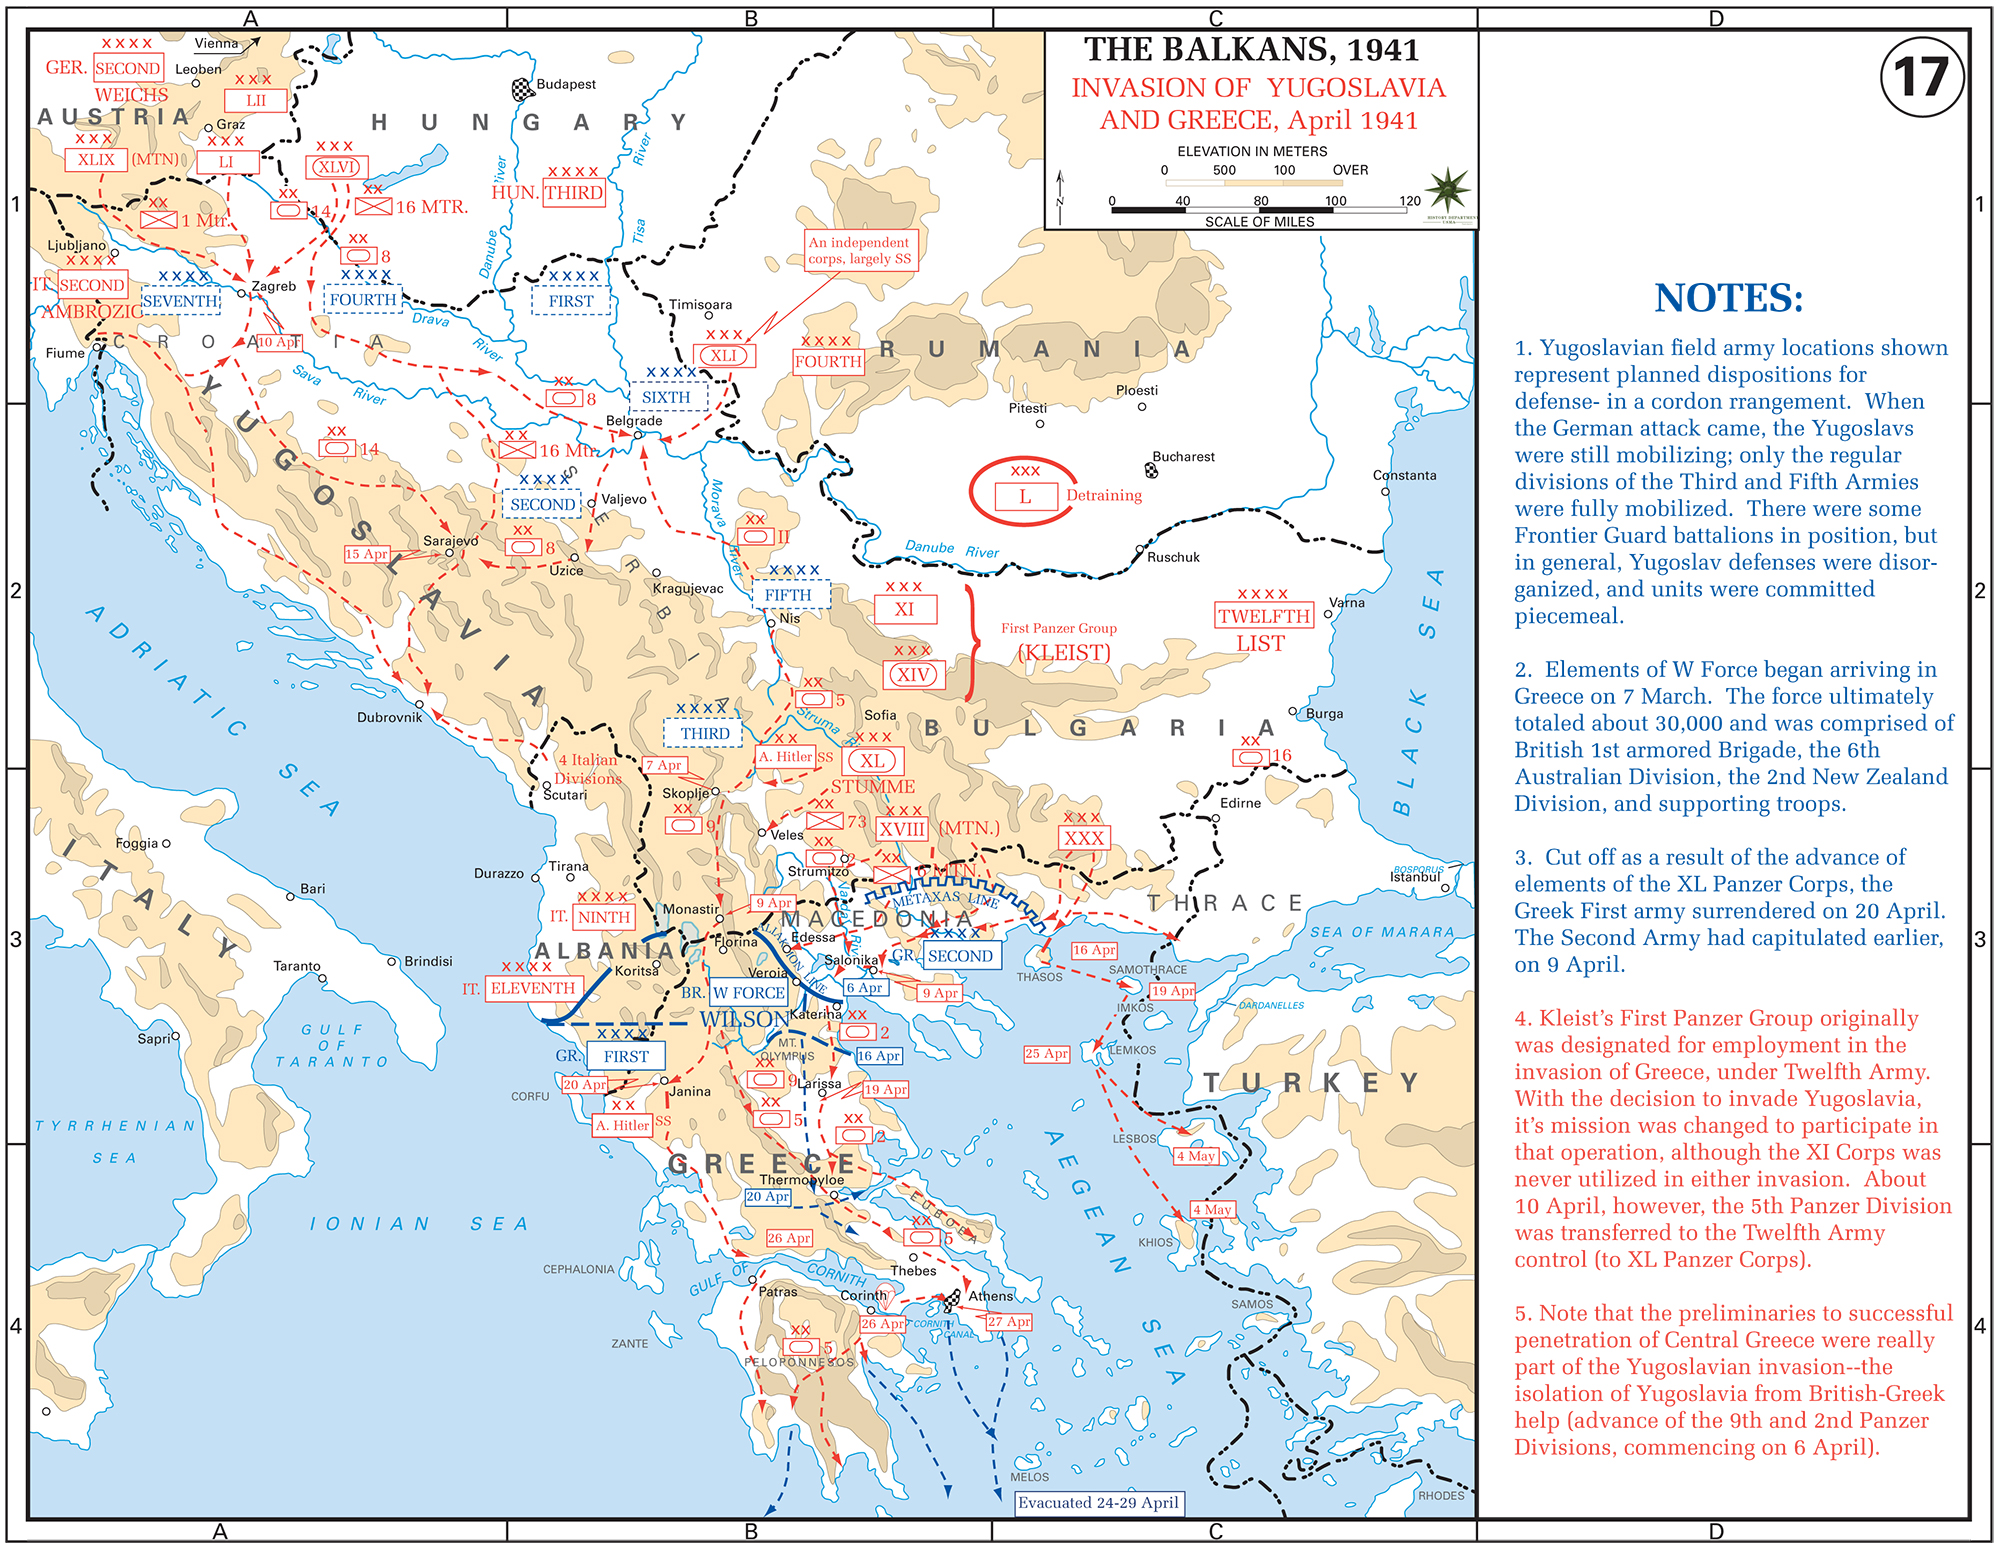 WWII - The Balkans 1941: Invasion of Yugoslavia and Greece, April 1941